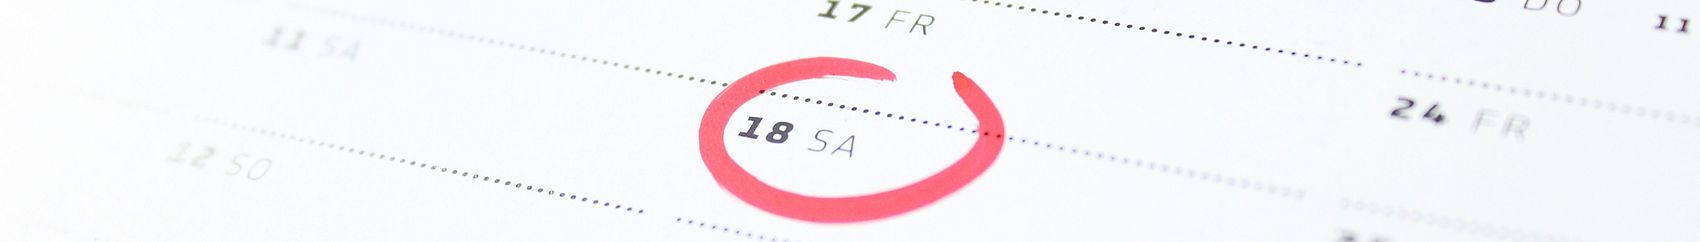 Image about timing (calendar)